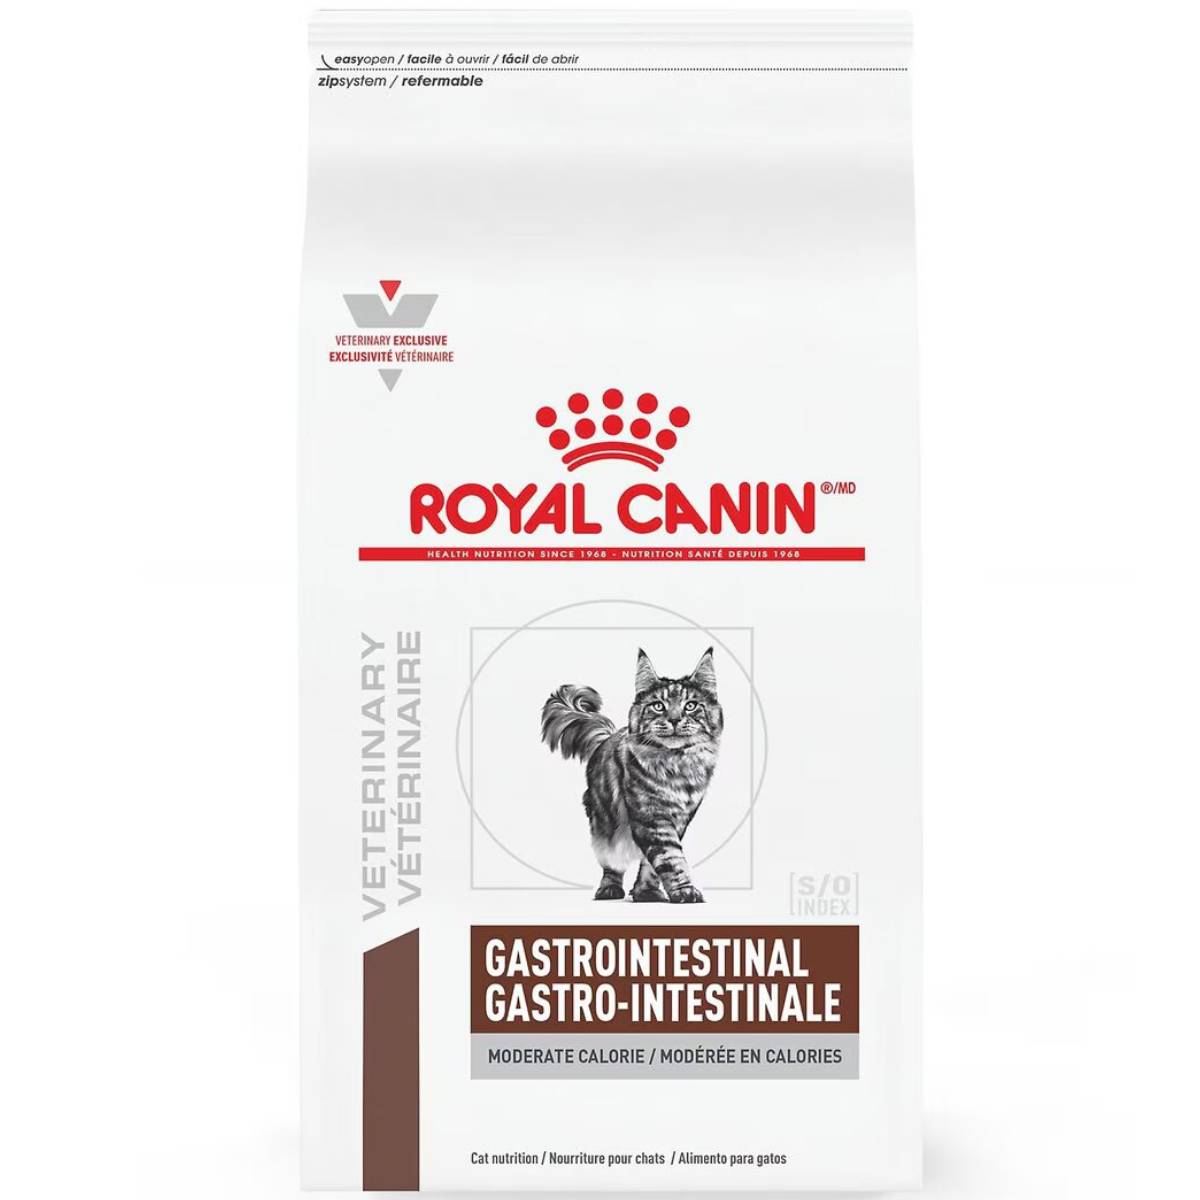 Royal Canin Veterinary Diet Adult Gastrointestinal Moderate Calorie Dry Cat Food